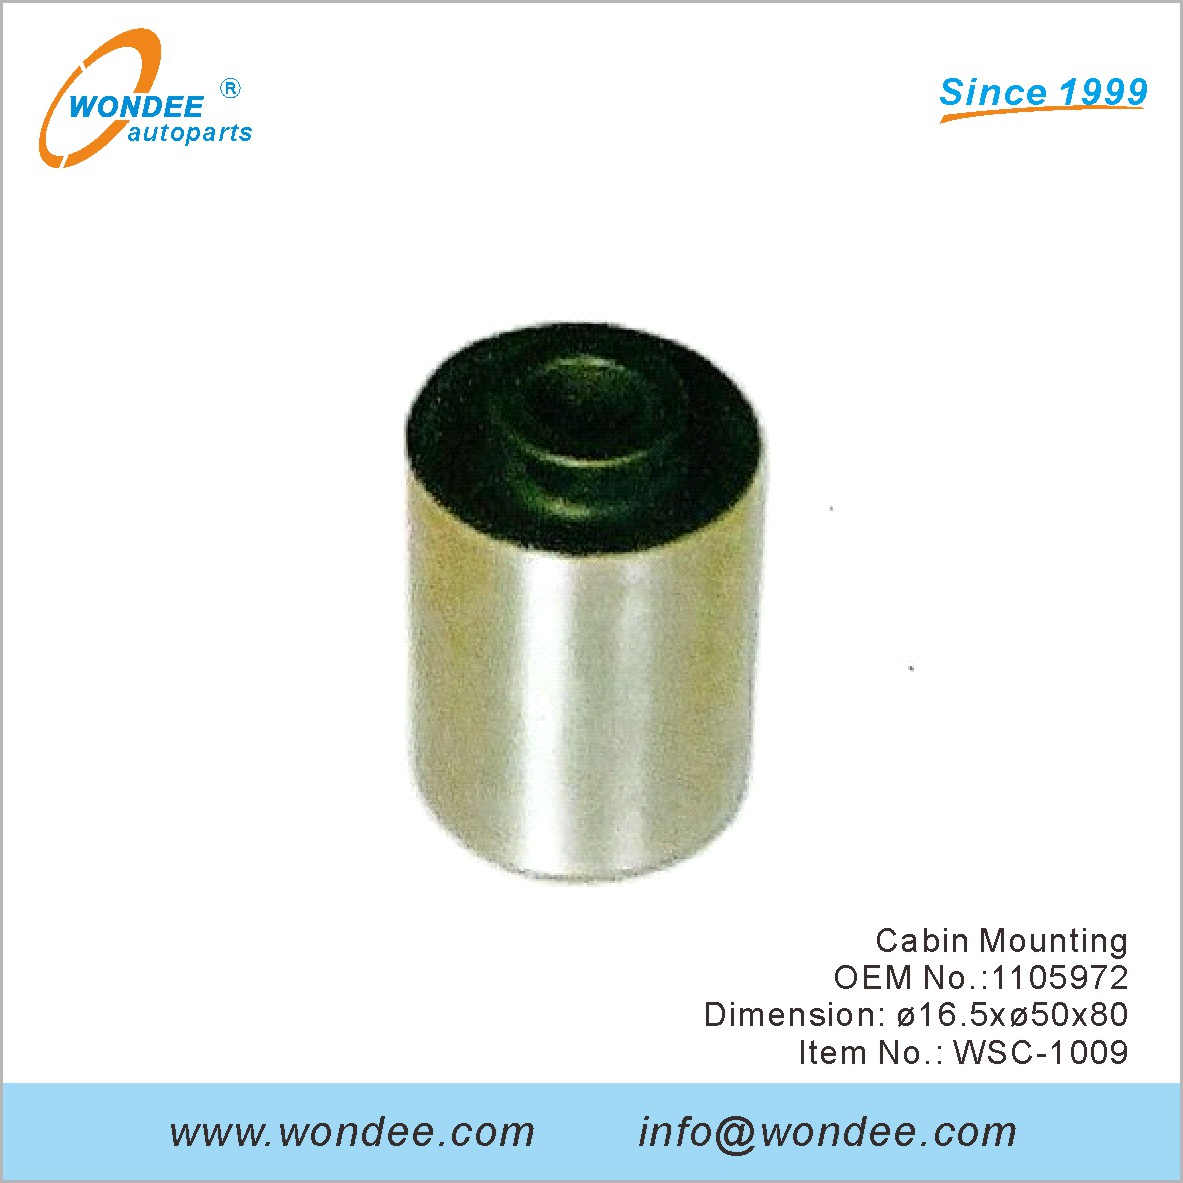 Cabin Mounting OEM 1105972 from WONDEE